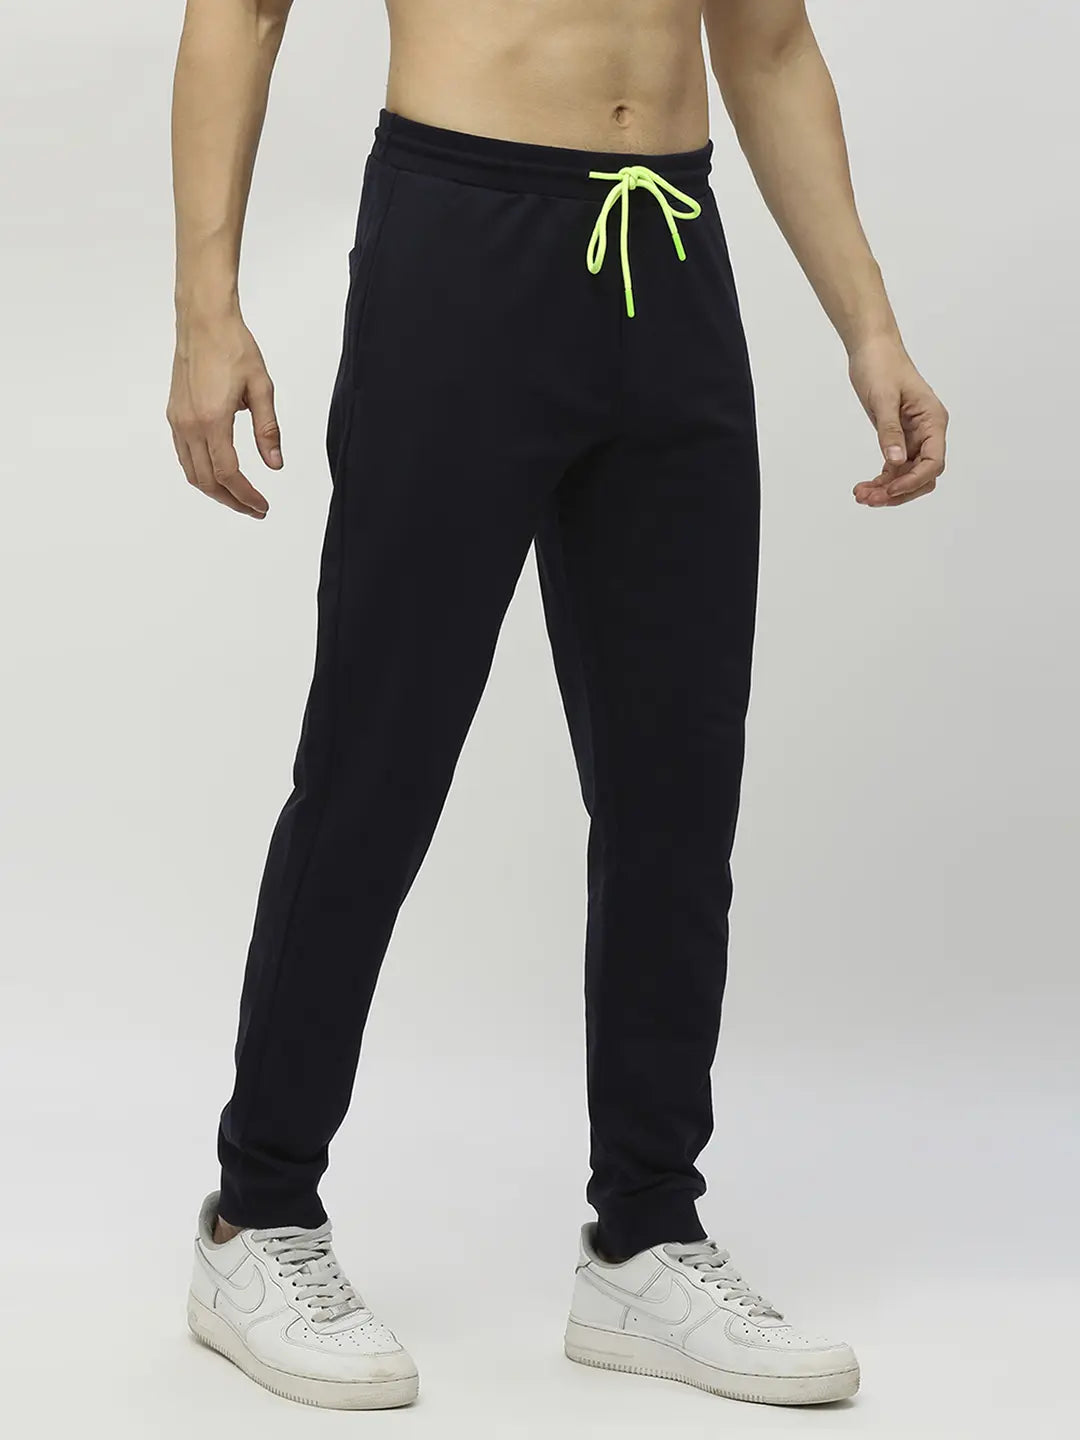 Style n feel Men's Cotton Track Pants,Joggers,Lounge Bottoms,Lower,Pajamas  for Gyming/Exercise/Jogging/